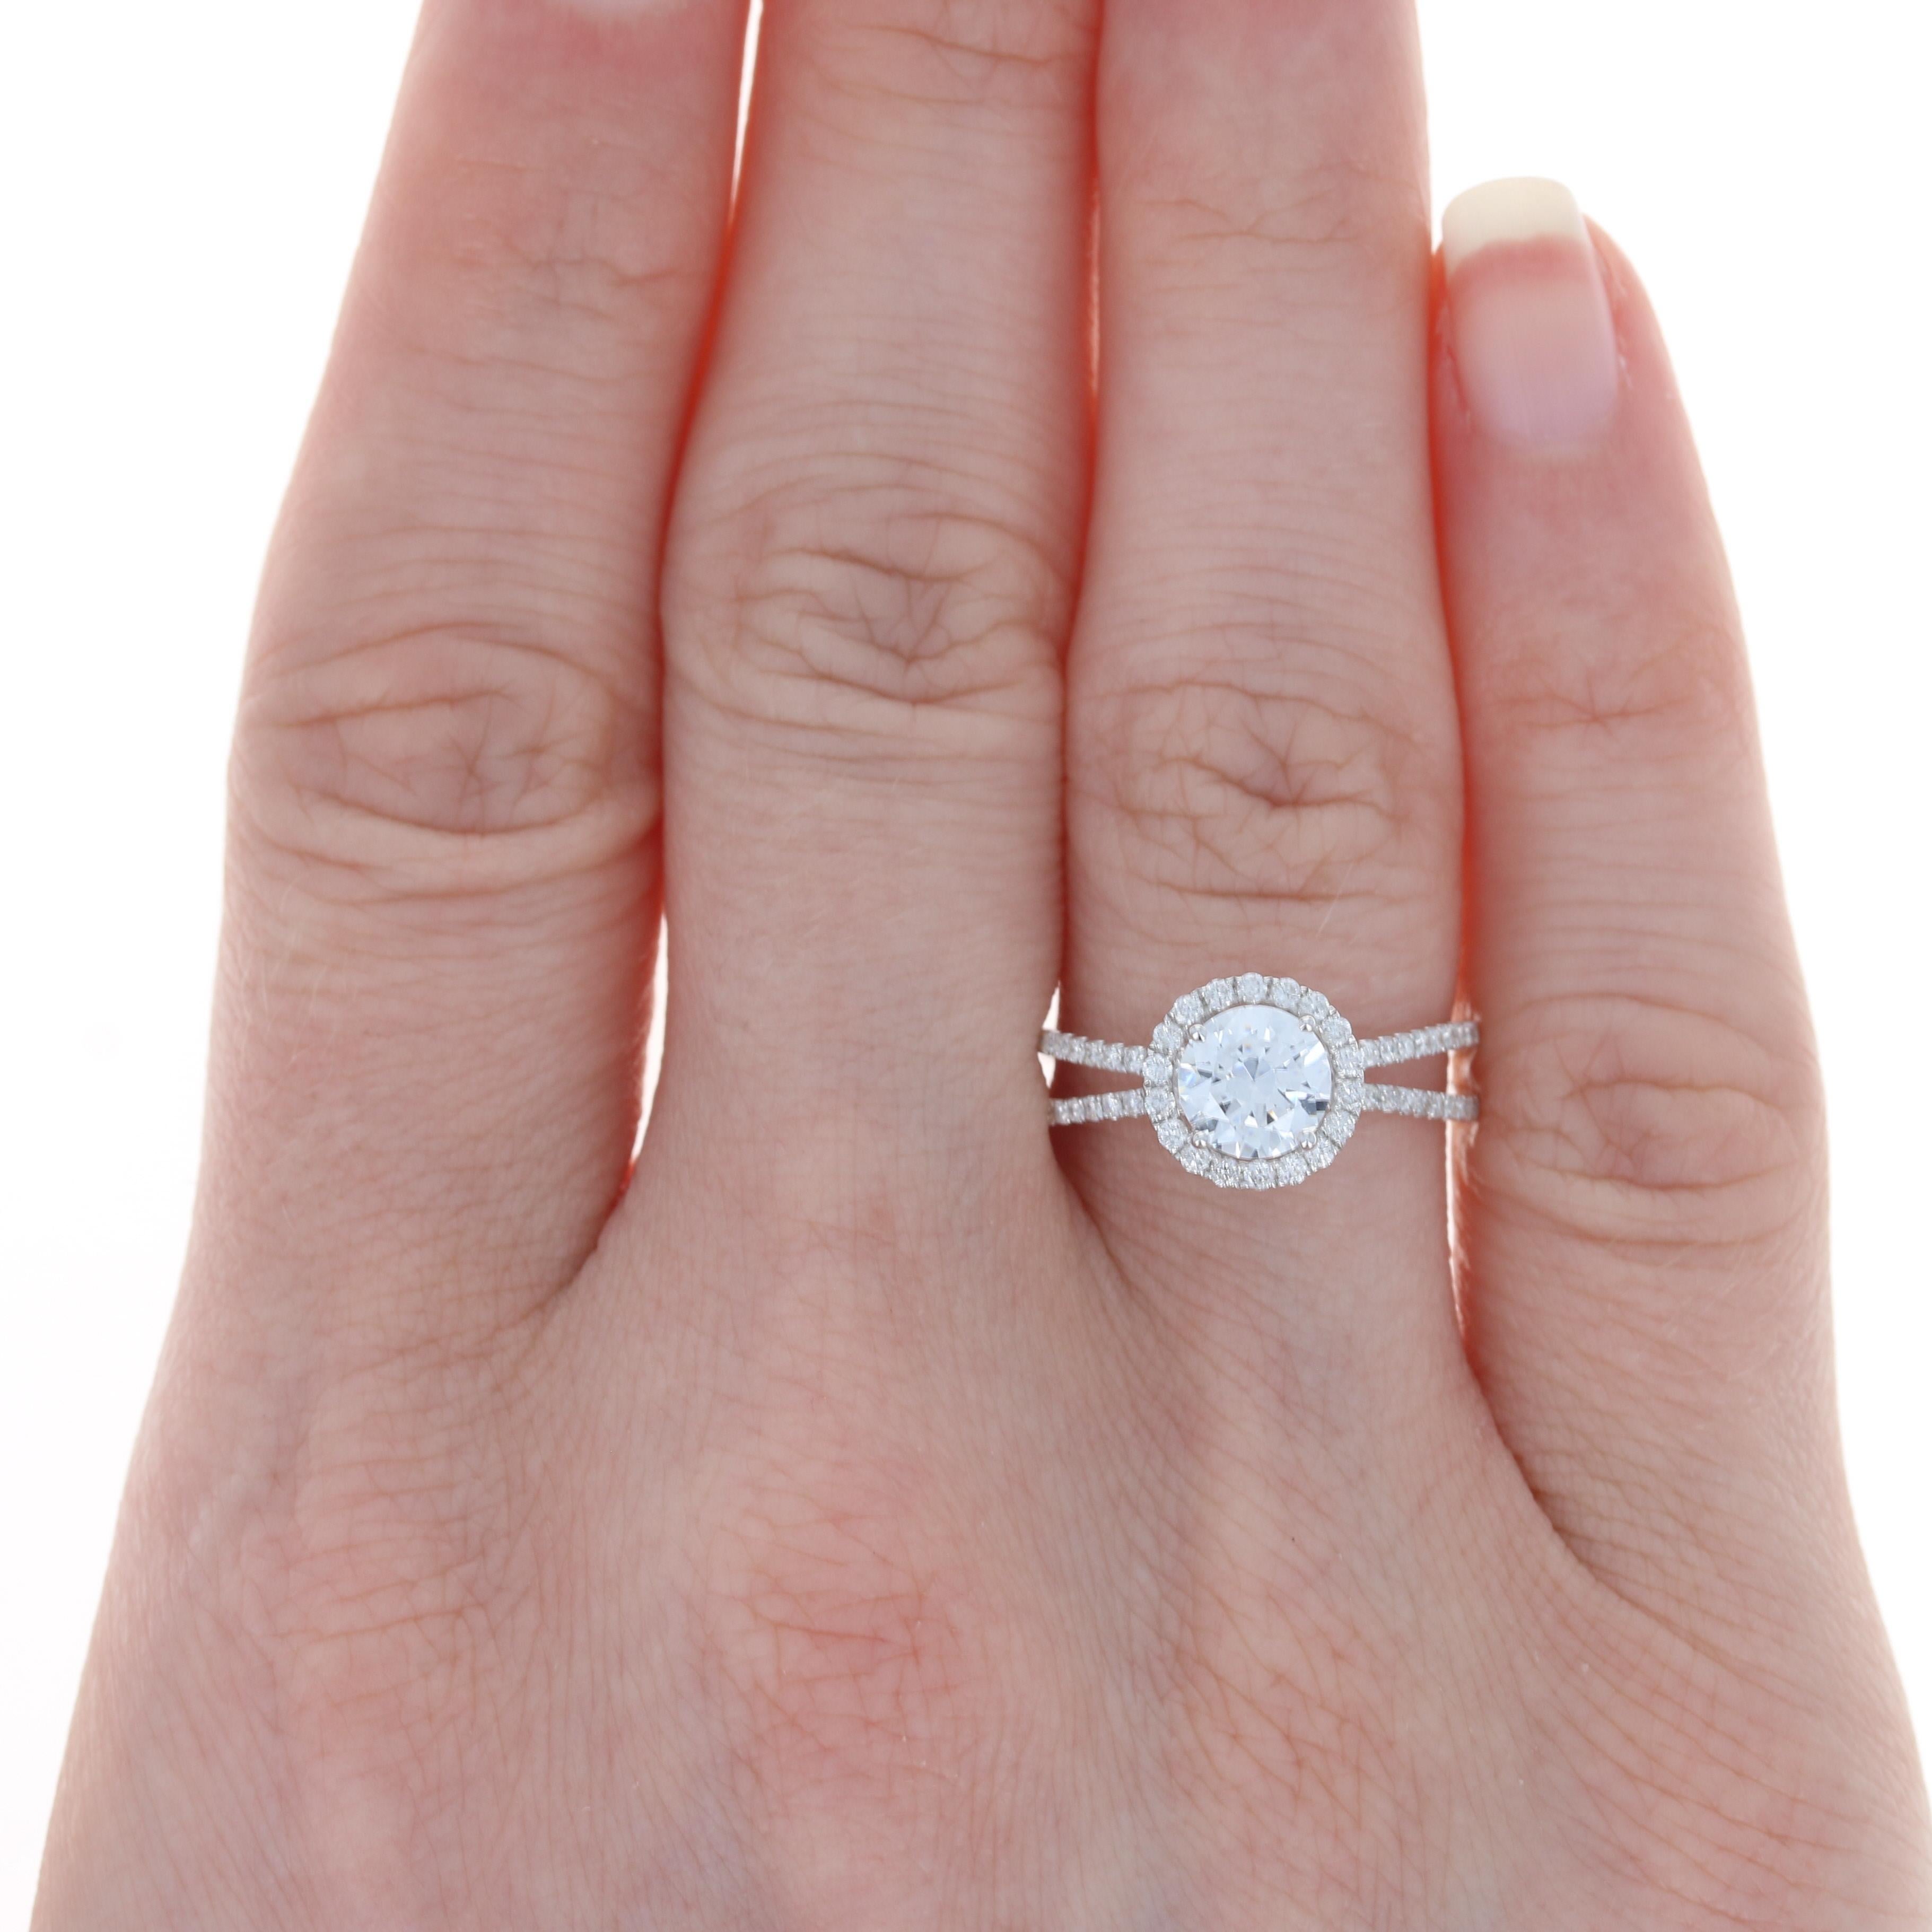 Composed of 18k white gold, this breathtaking NEW semi-mount engagement ring showcases a cubic zirconia set as a placeholder for the 6mm - 6.5mm diamond or gemstone solitaire of your choosing. The solitaire is elegantly encircled by a sparkling